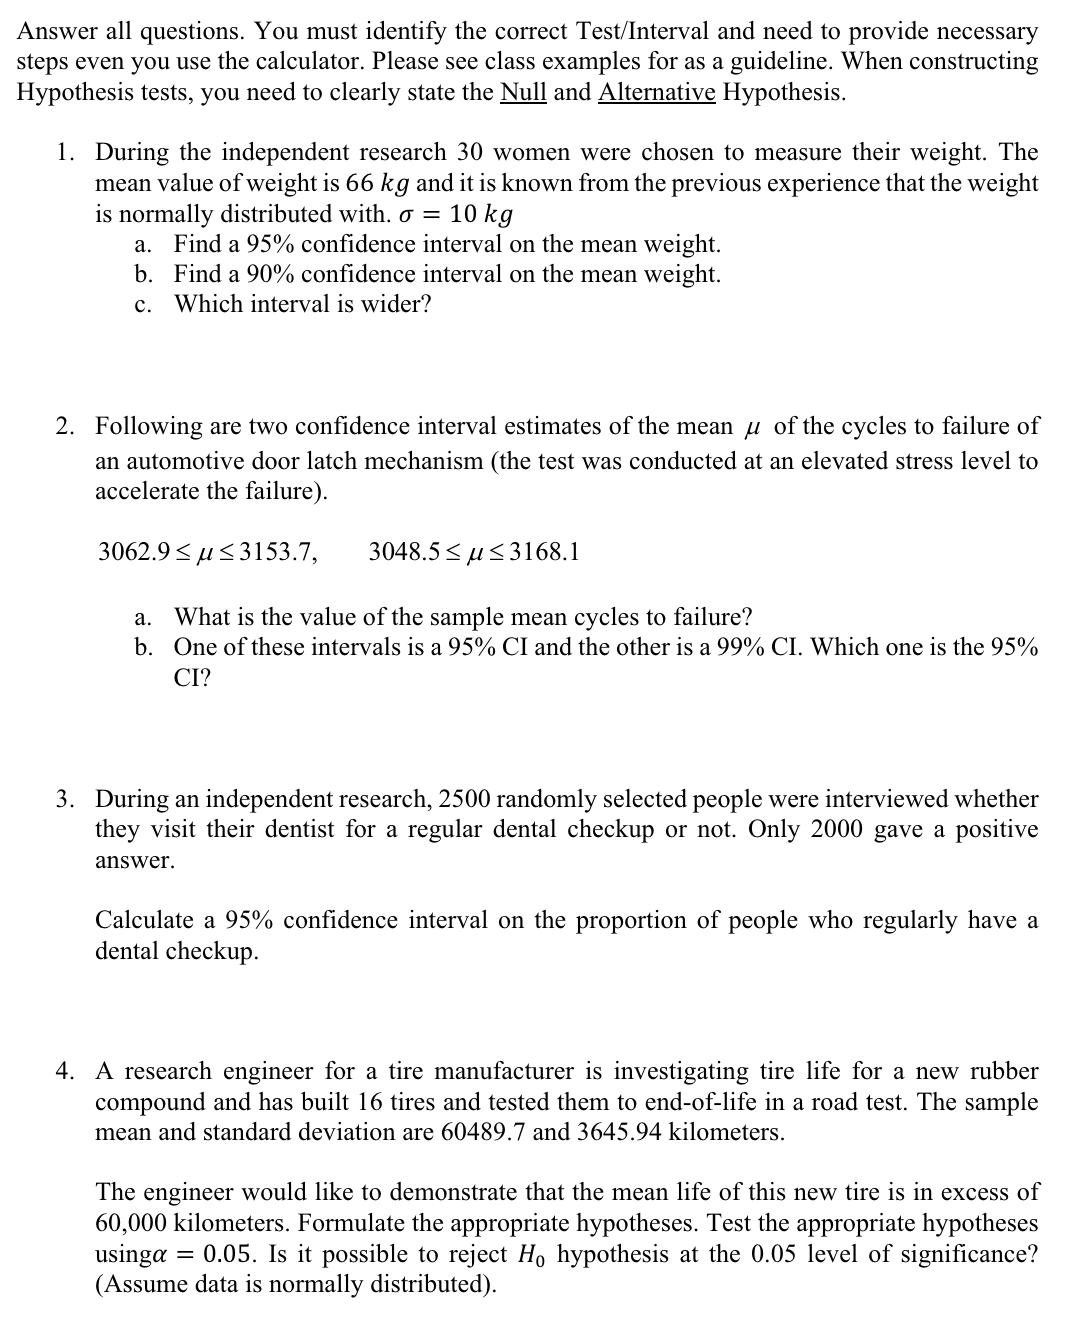 Answer all questions. You must identify the correct Test/Interval and need to provide necessary
steps even you use the calculator. Please see class examples for as a guideline. When constructing
Hypothesis tests, you need to clearly state the Null and Alternative Hypothesis.
1. During the independent research 30 women were chosen to measure their weight. The
mean value of weight is 66 kg and it is known from the previous experience that the weight
is normally distributed with. σ = 10 kg
a. Find a 95% confidence interval on the mean weight.
b. Find a 90% confidence interval on the mean weight.
c. Which interval is wider?
2. Following are two confidence interval estimates of the mean μ of the cycles to failure of
an automotive door latch mechanism (the test was conducted at an elevated stress level to
accelerate the failure).
3062.9≤3153.7,
3048.5≤3168.1
a. What is the value of the sample mean cycles to failure?
b. One of these intervals is a 95% CI and the other is a 99% CI. Which one is the 95%
CI?
3. During an independent research, 2500 randomly selected people were interviewed whether
they visit their dentist for a regular dental checkup or not. Only 2000 gave a positive
answer.
Calculate a 95% confidence interval on the proportion of people who regularly have a
dental checkup.
4. A research engineer for a tire manufacturer is investigating tire life for a new rubber
compound and has built 16 tires and tested them to end-of-life in a road test. The sample
mean and standard deviation are 60489.7 and 3645.94 kilometers.
The engineer would like to demonstrate that the mean life of this new tire is in excess of
60,000 kilometers. Formulate the appropriate hypotheses. Test the appropriate hypotheses
usinga 0.05. Is it possible to reject Ho hypothesis at the 0.05 level of significance?
(Assume data is normally distributed).
=